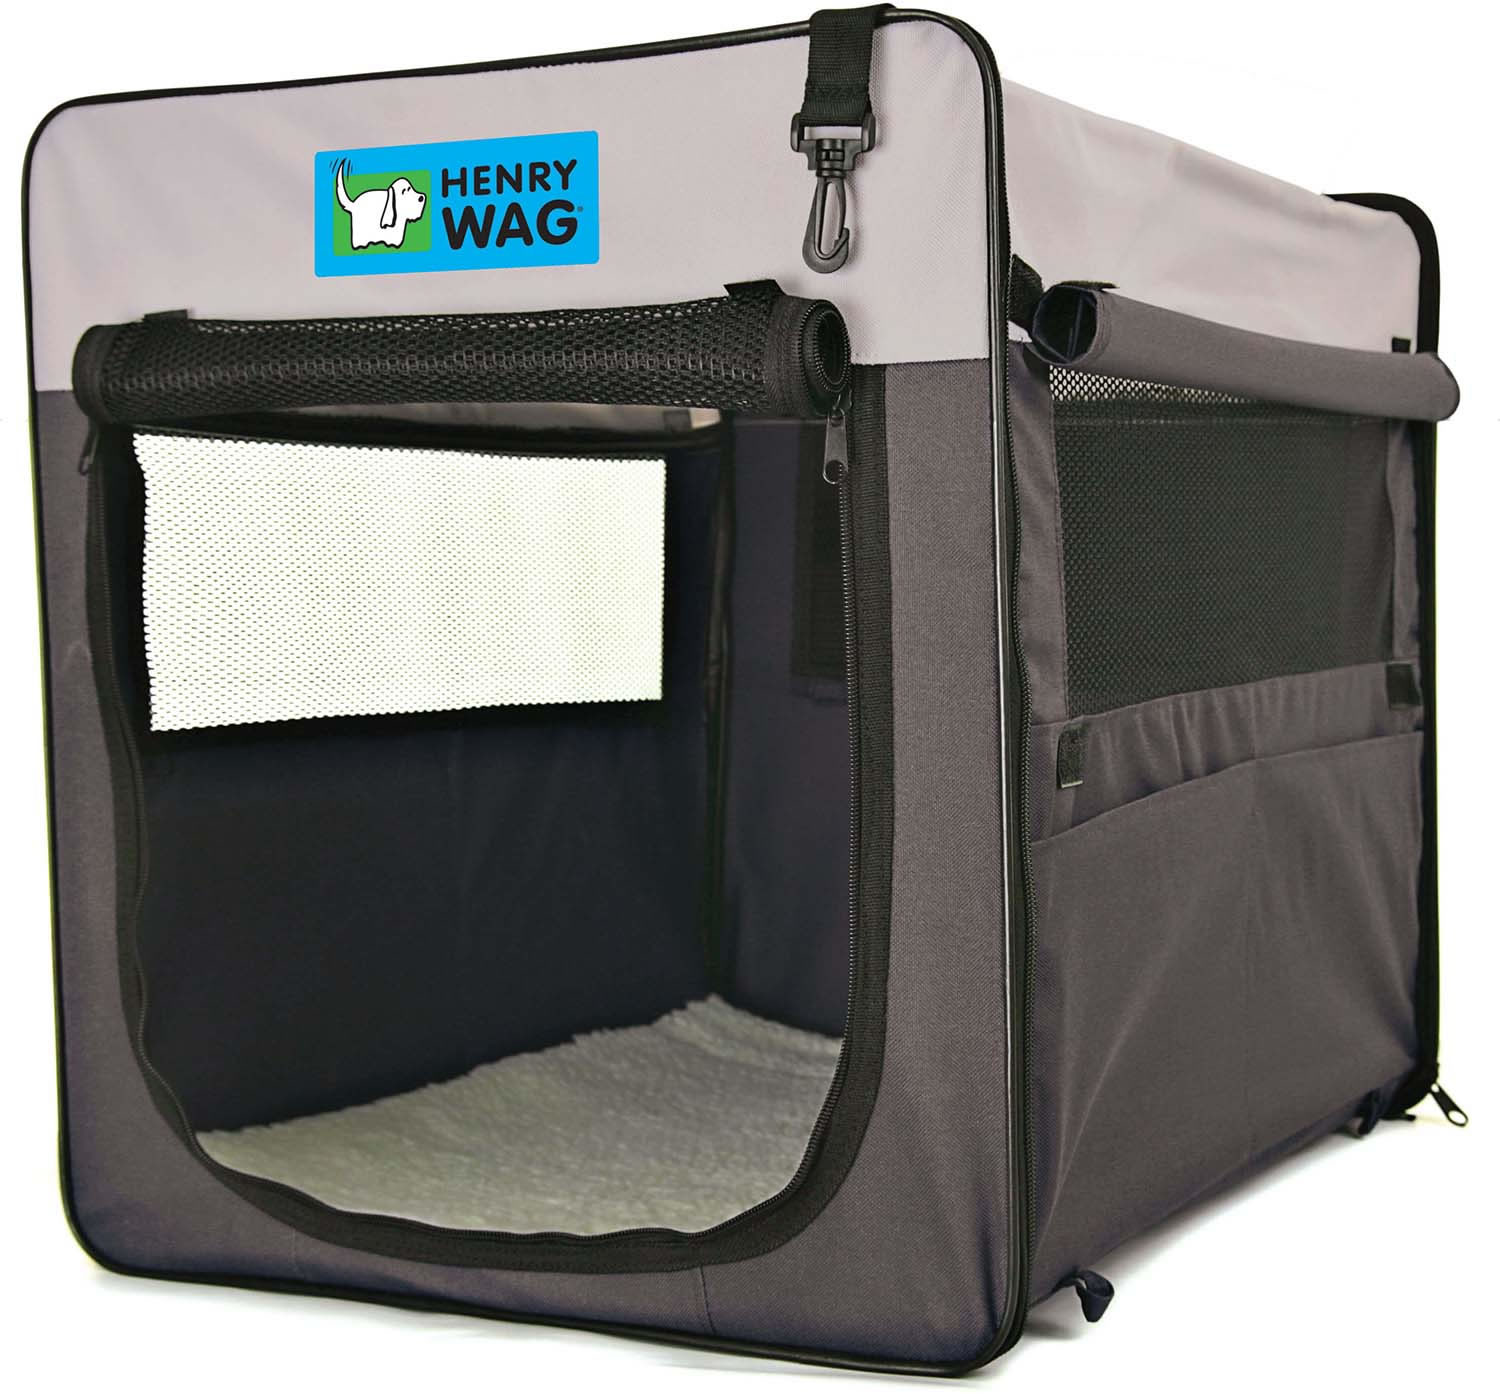 HENRY WAG FOLDING FABRIC CRATE